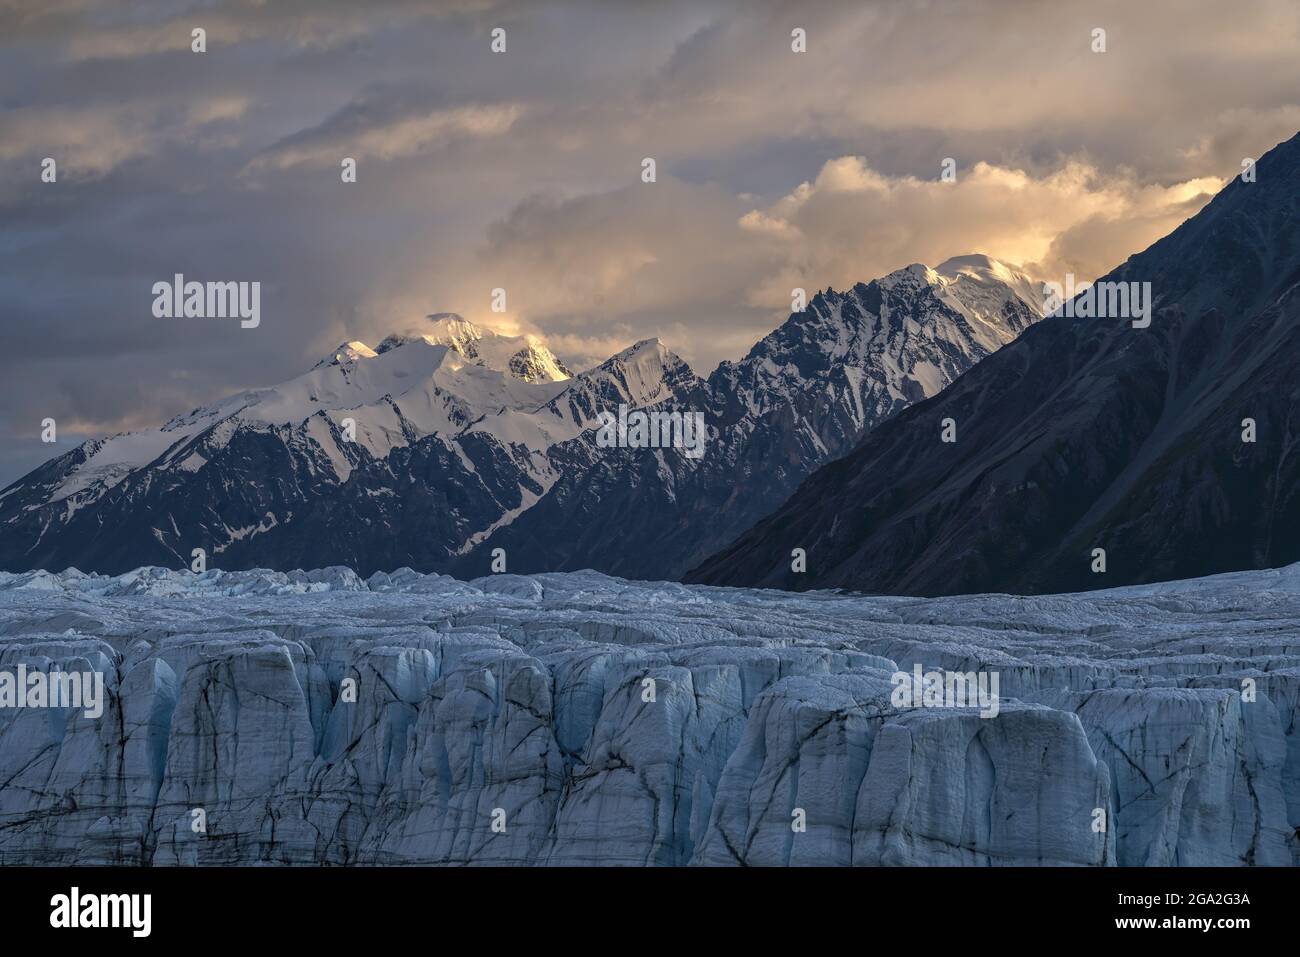 The vast Donjek Glacier in Kluane National Park with the sunset lighting up the clouds over the snowcapped mountaintops creating a stunning image, ... Stock Photo